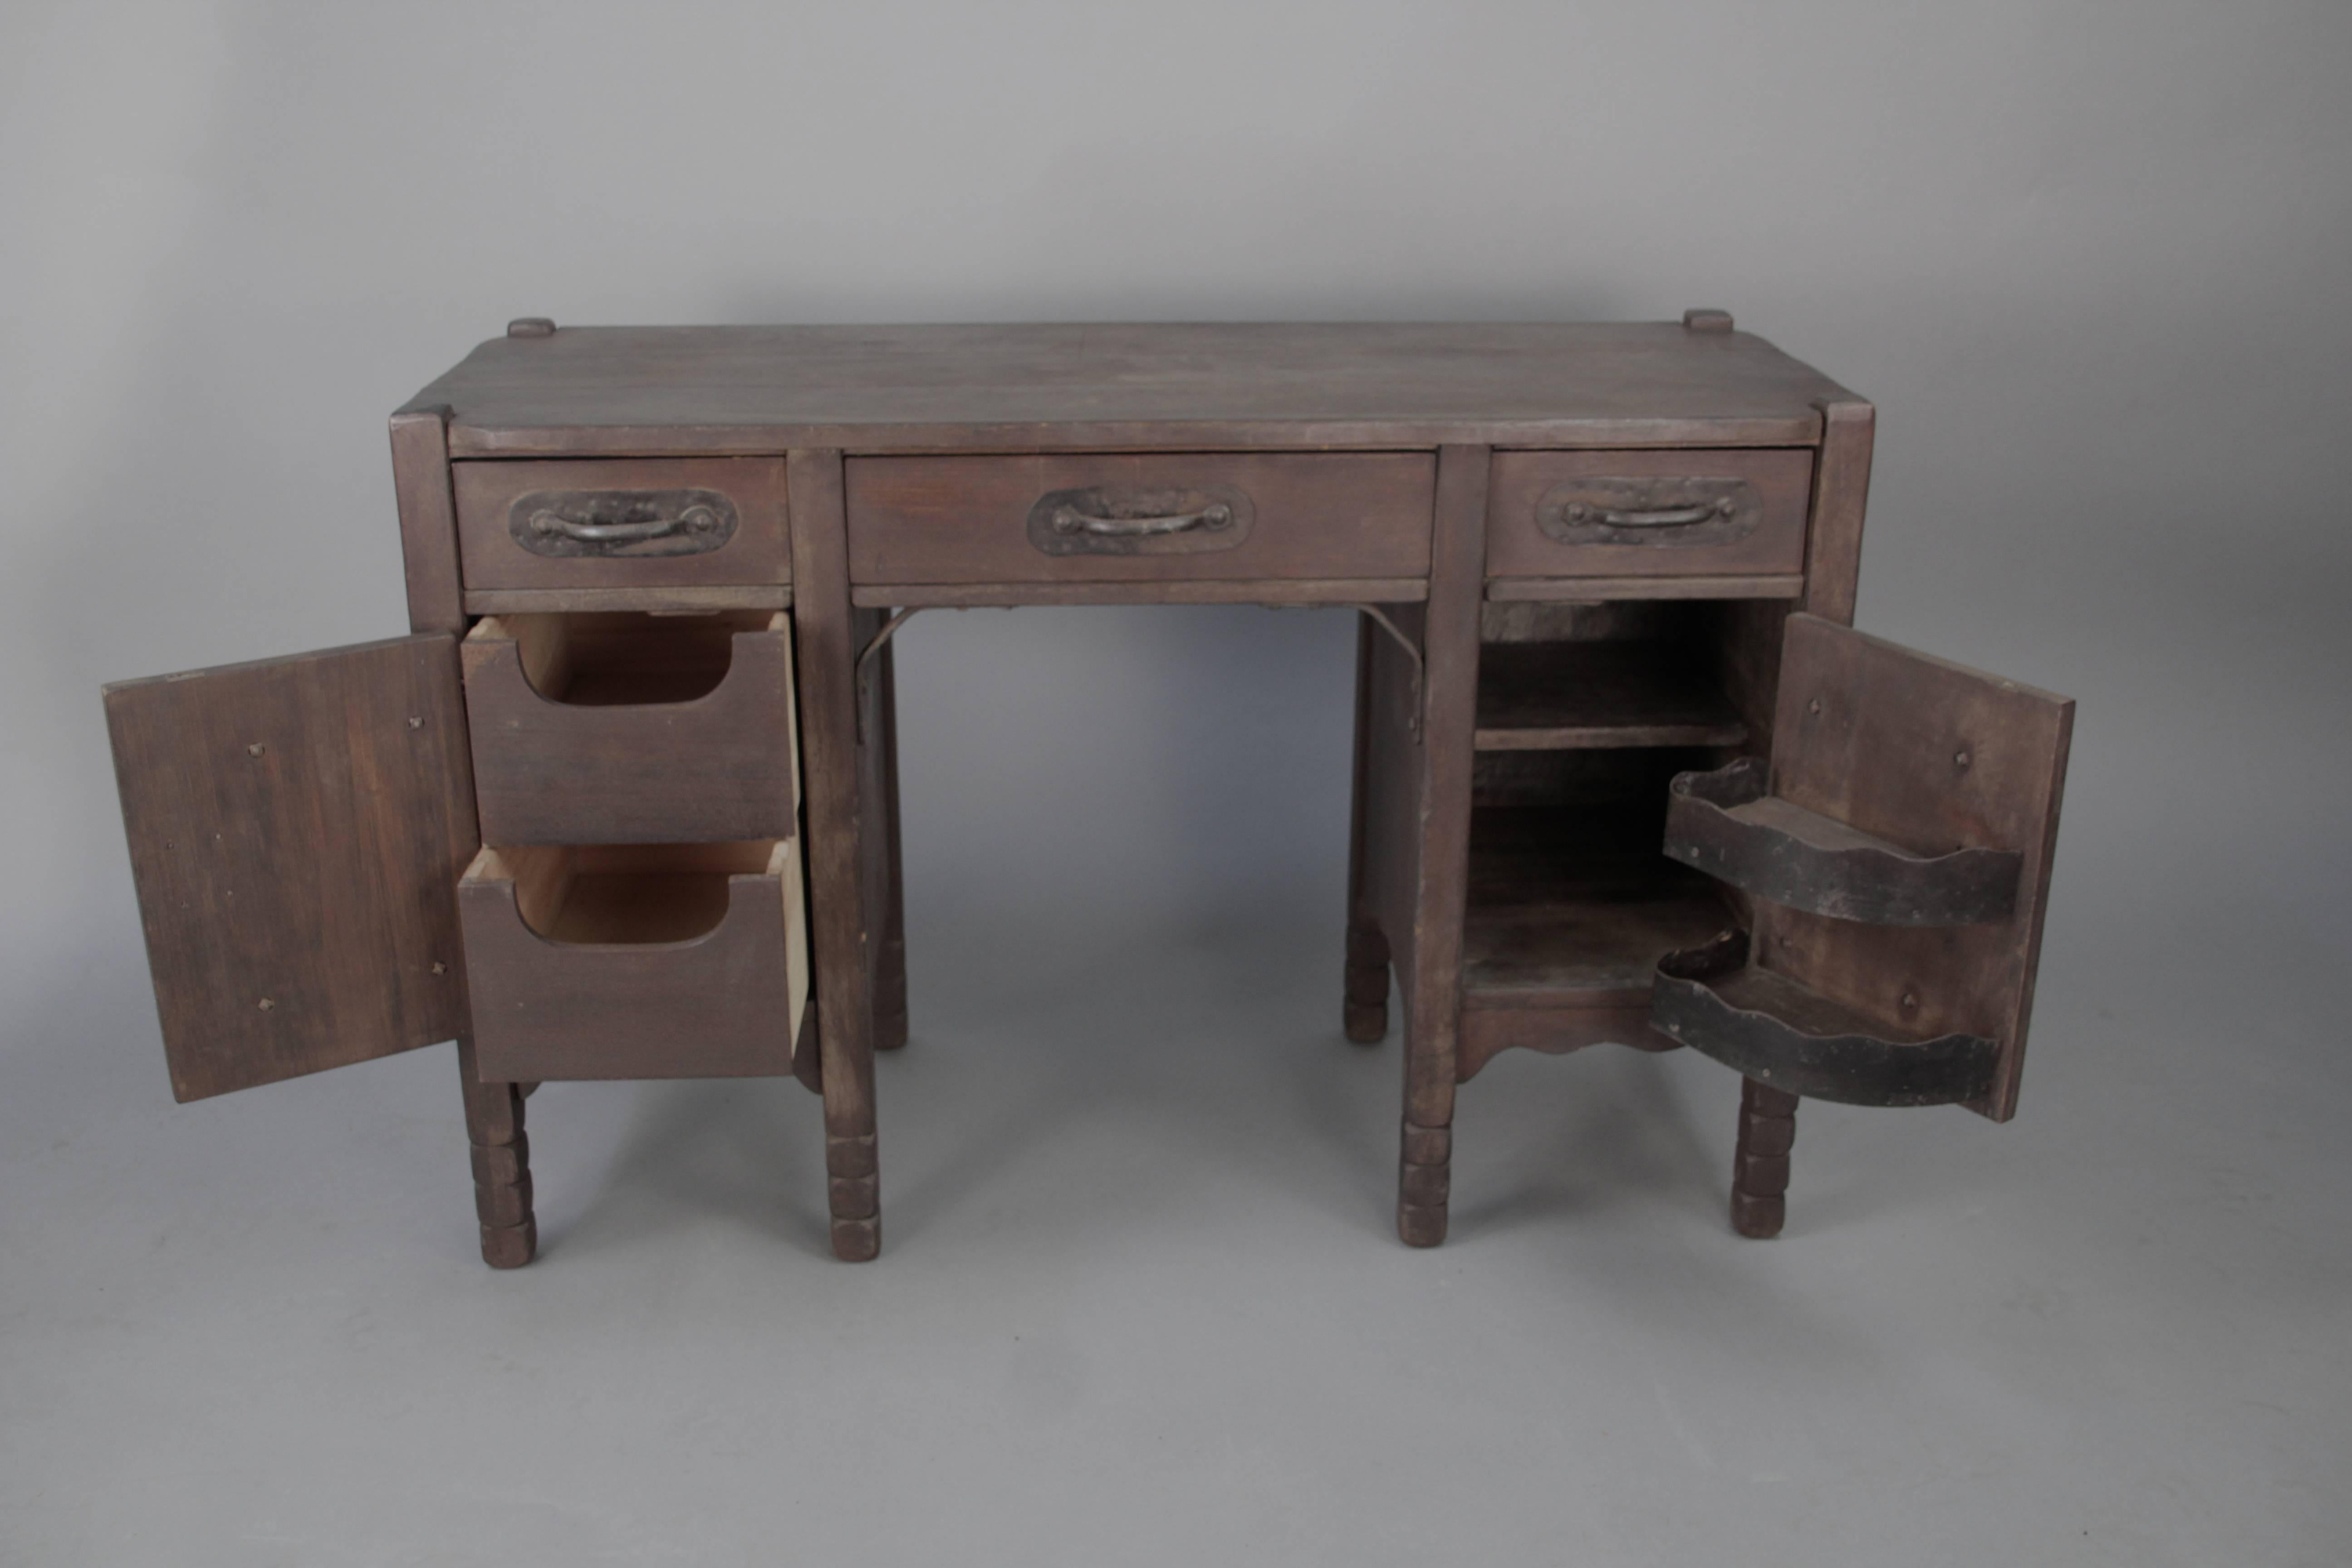 Early Monterey 1930s desk with original finish. Original metal inserts inside right cabinet. Signed.